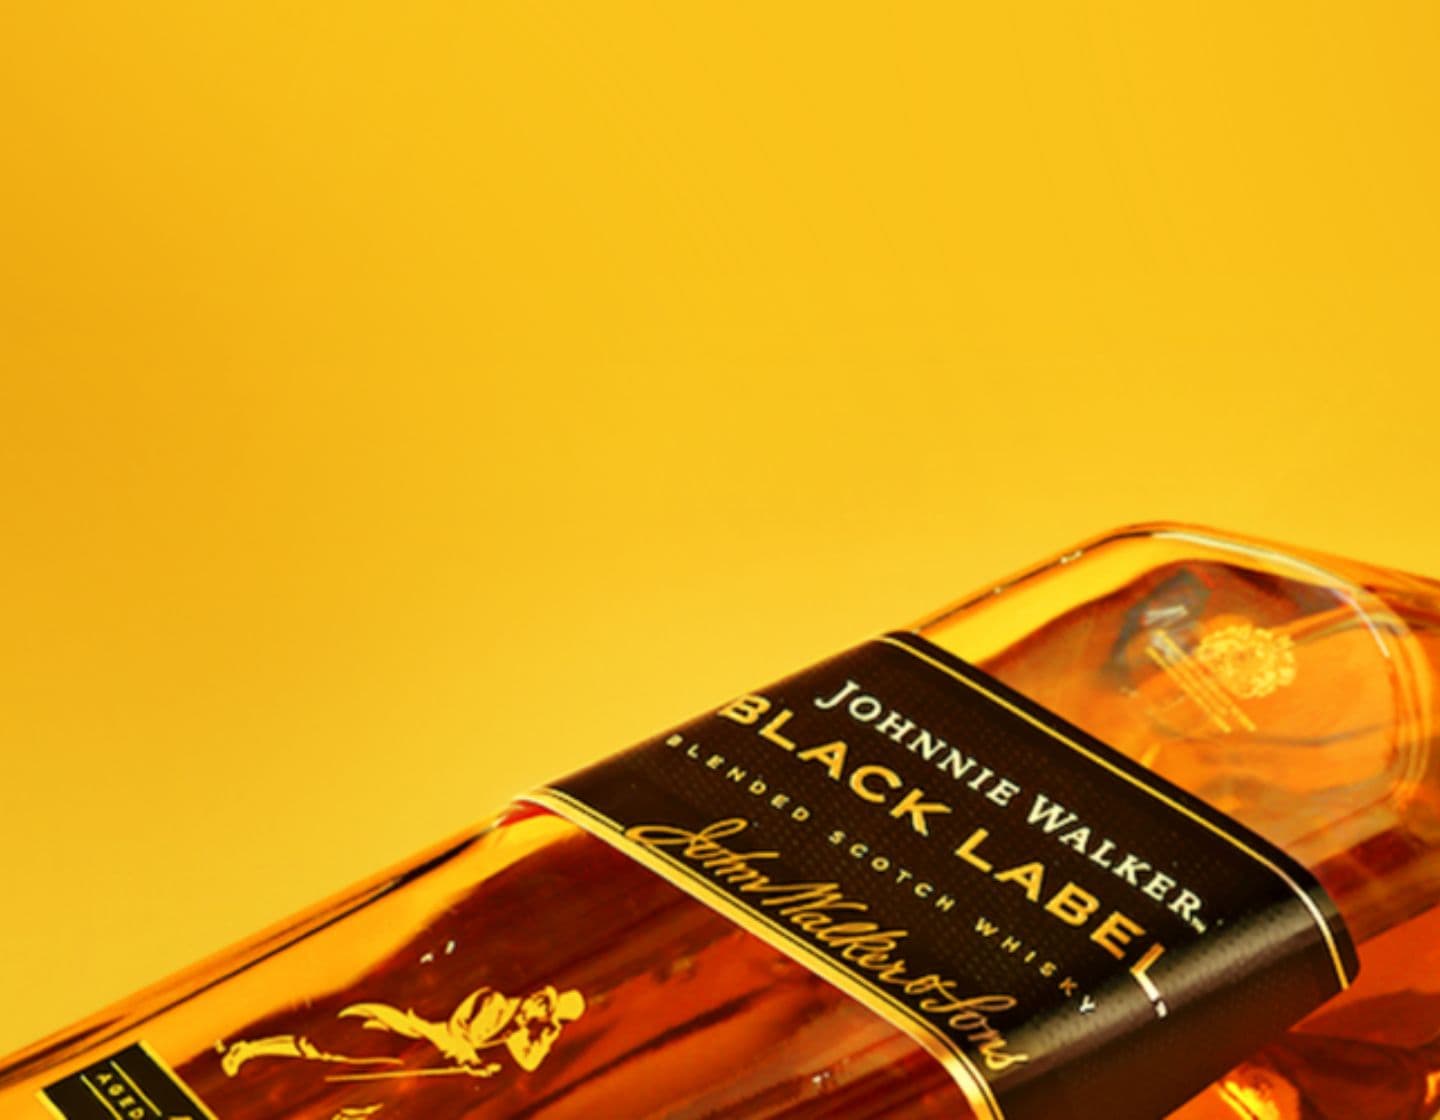 Close-up shot of Johnnie Walker Black Label against a yellow background 